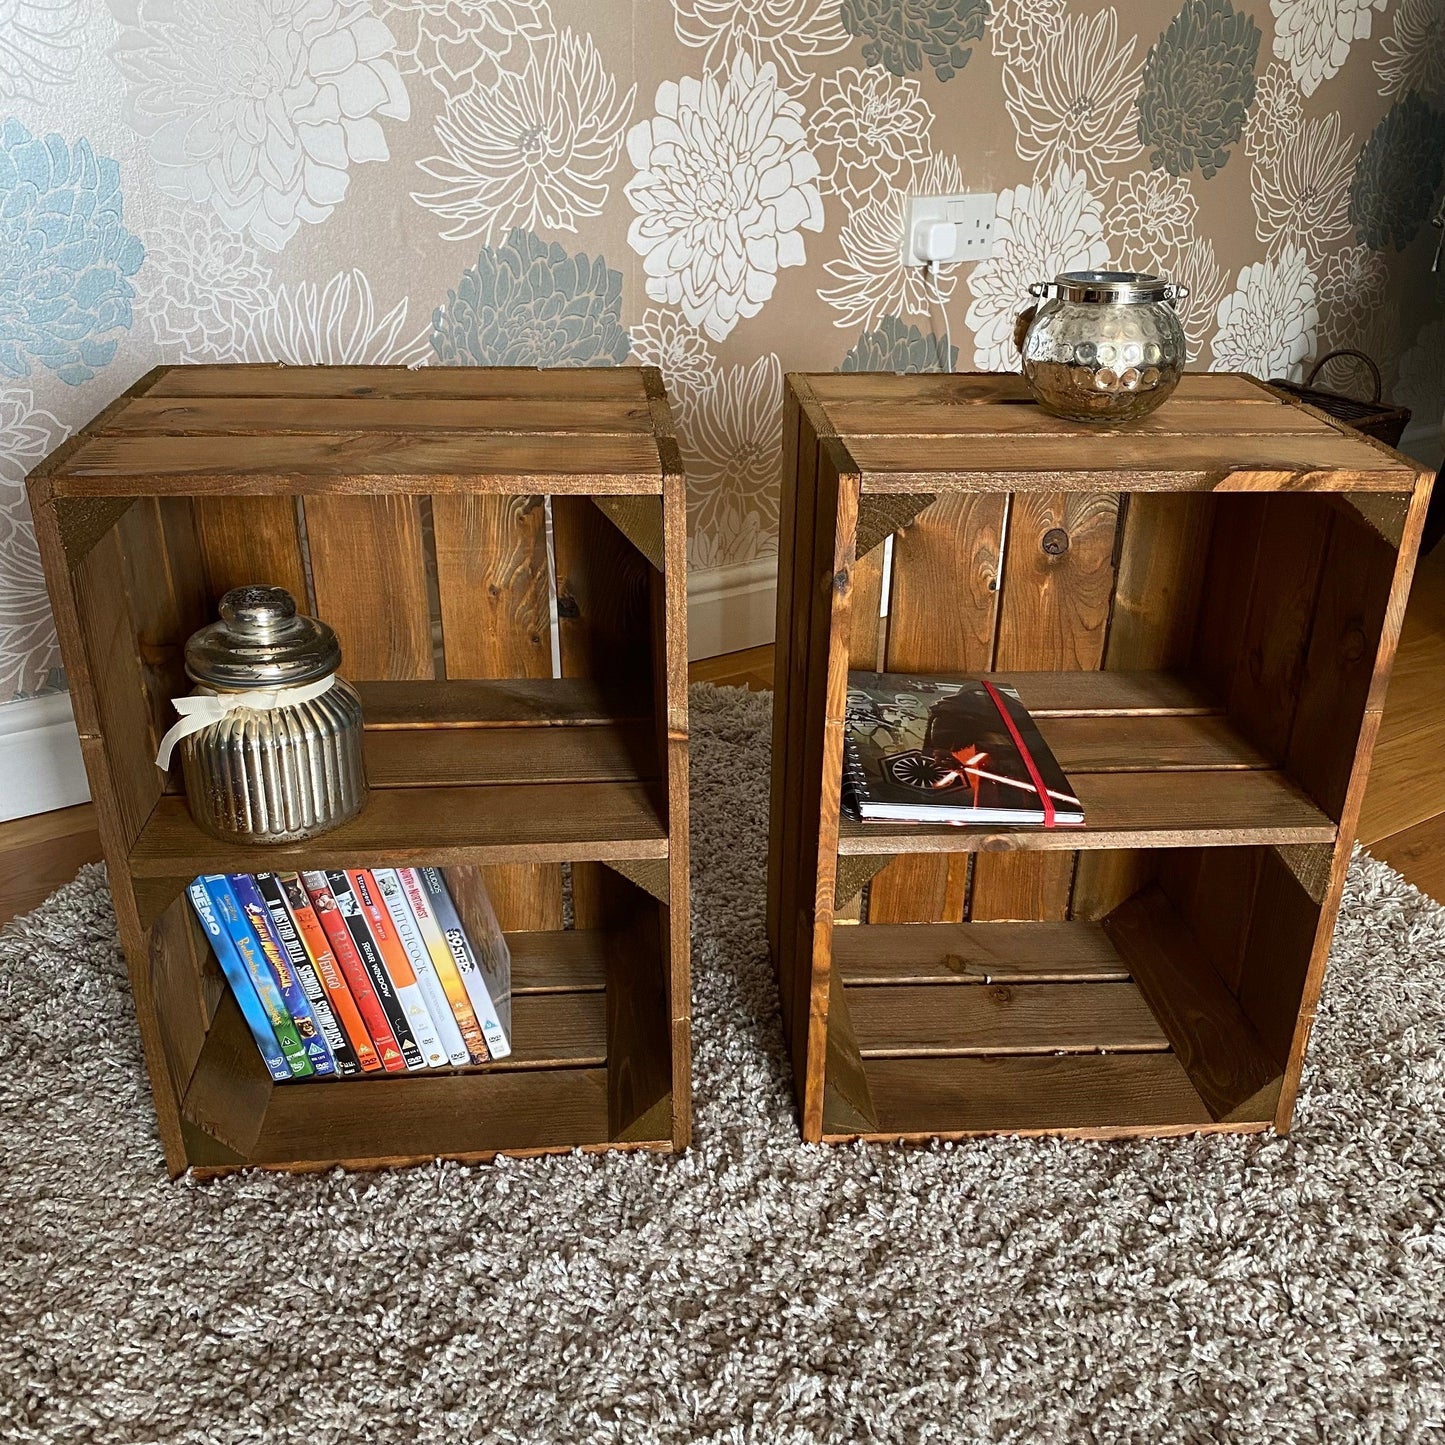 Pair of Bedside Table Crates in Medium Brown - Great Crates